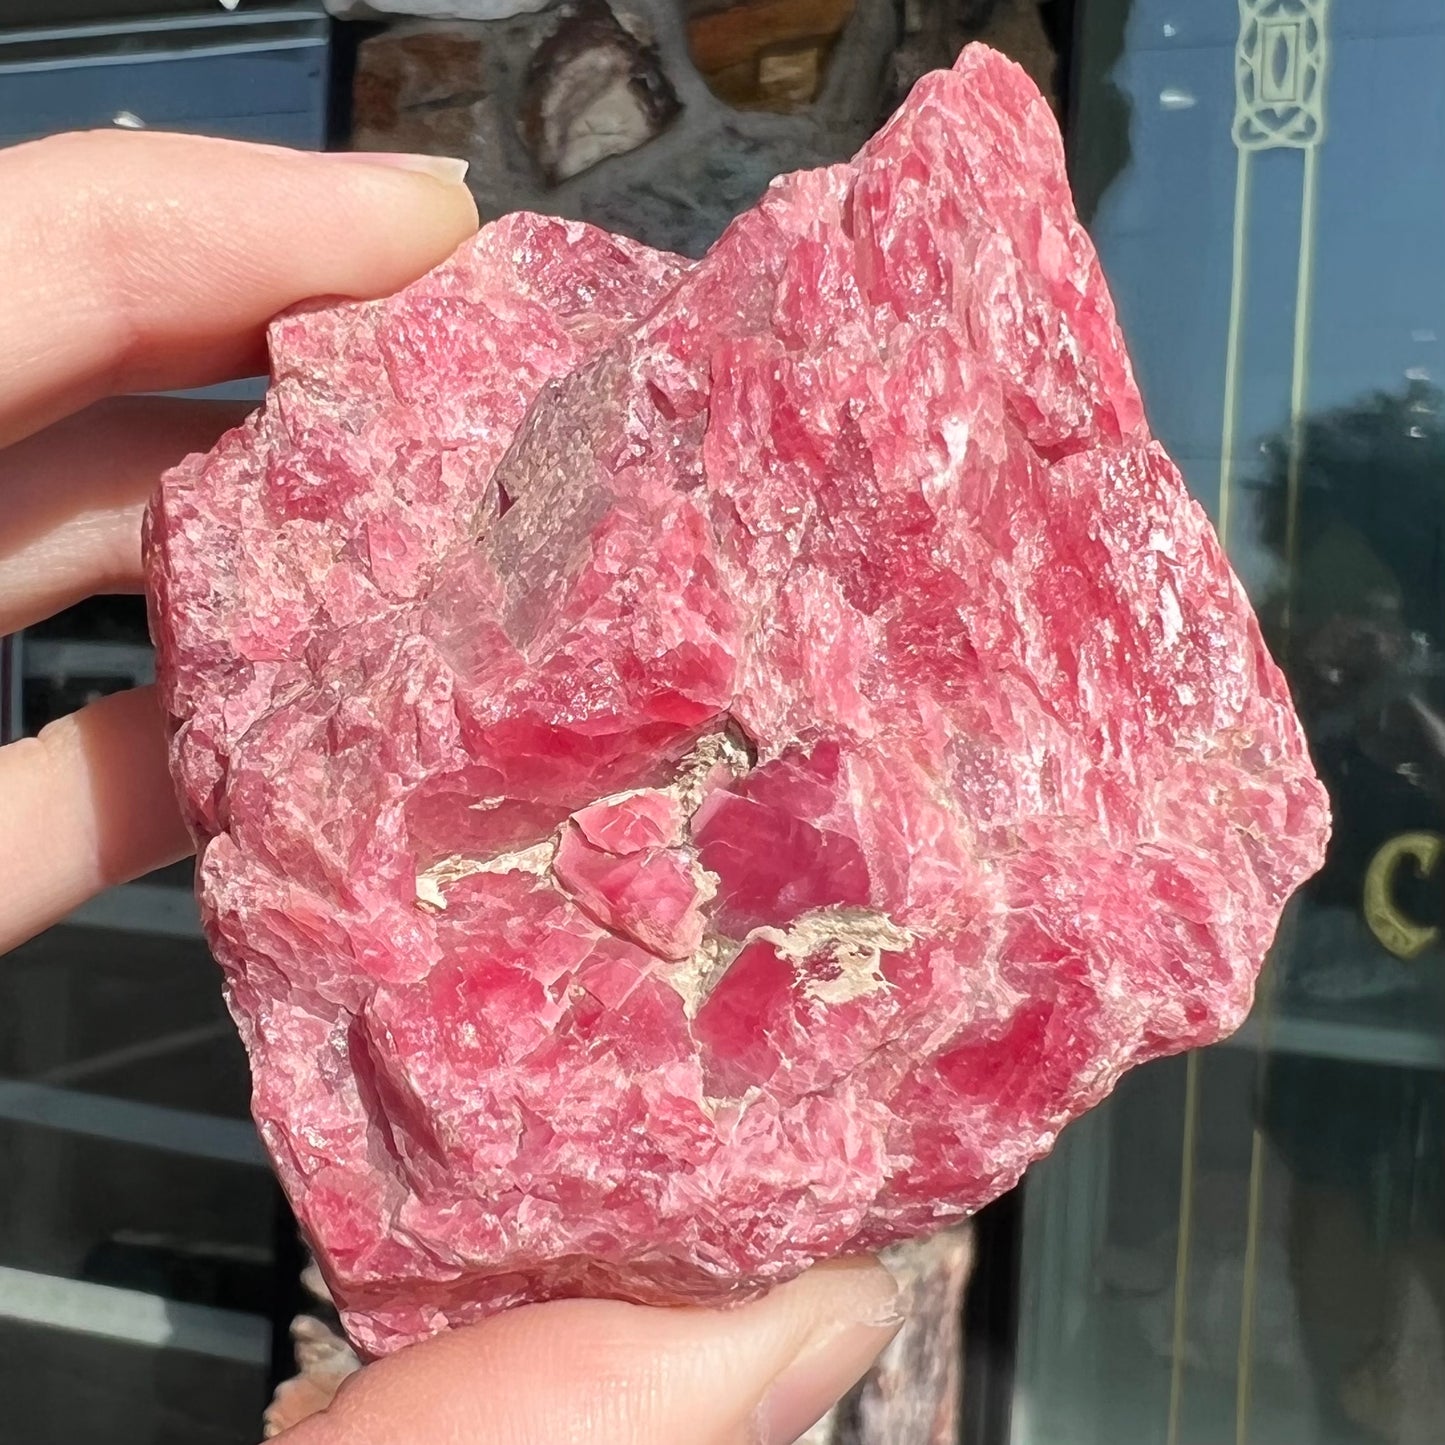 A rough pink rhodonite crystal specimen the size of a small fist.